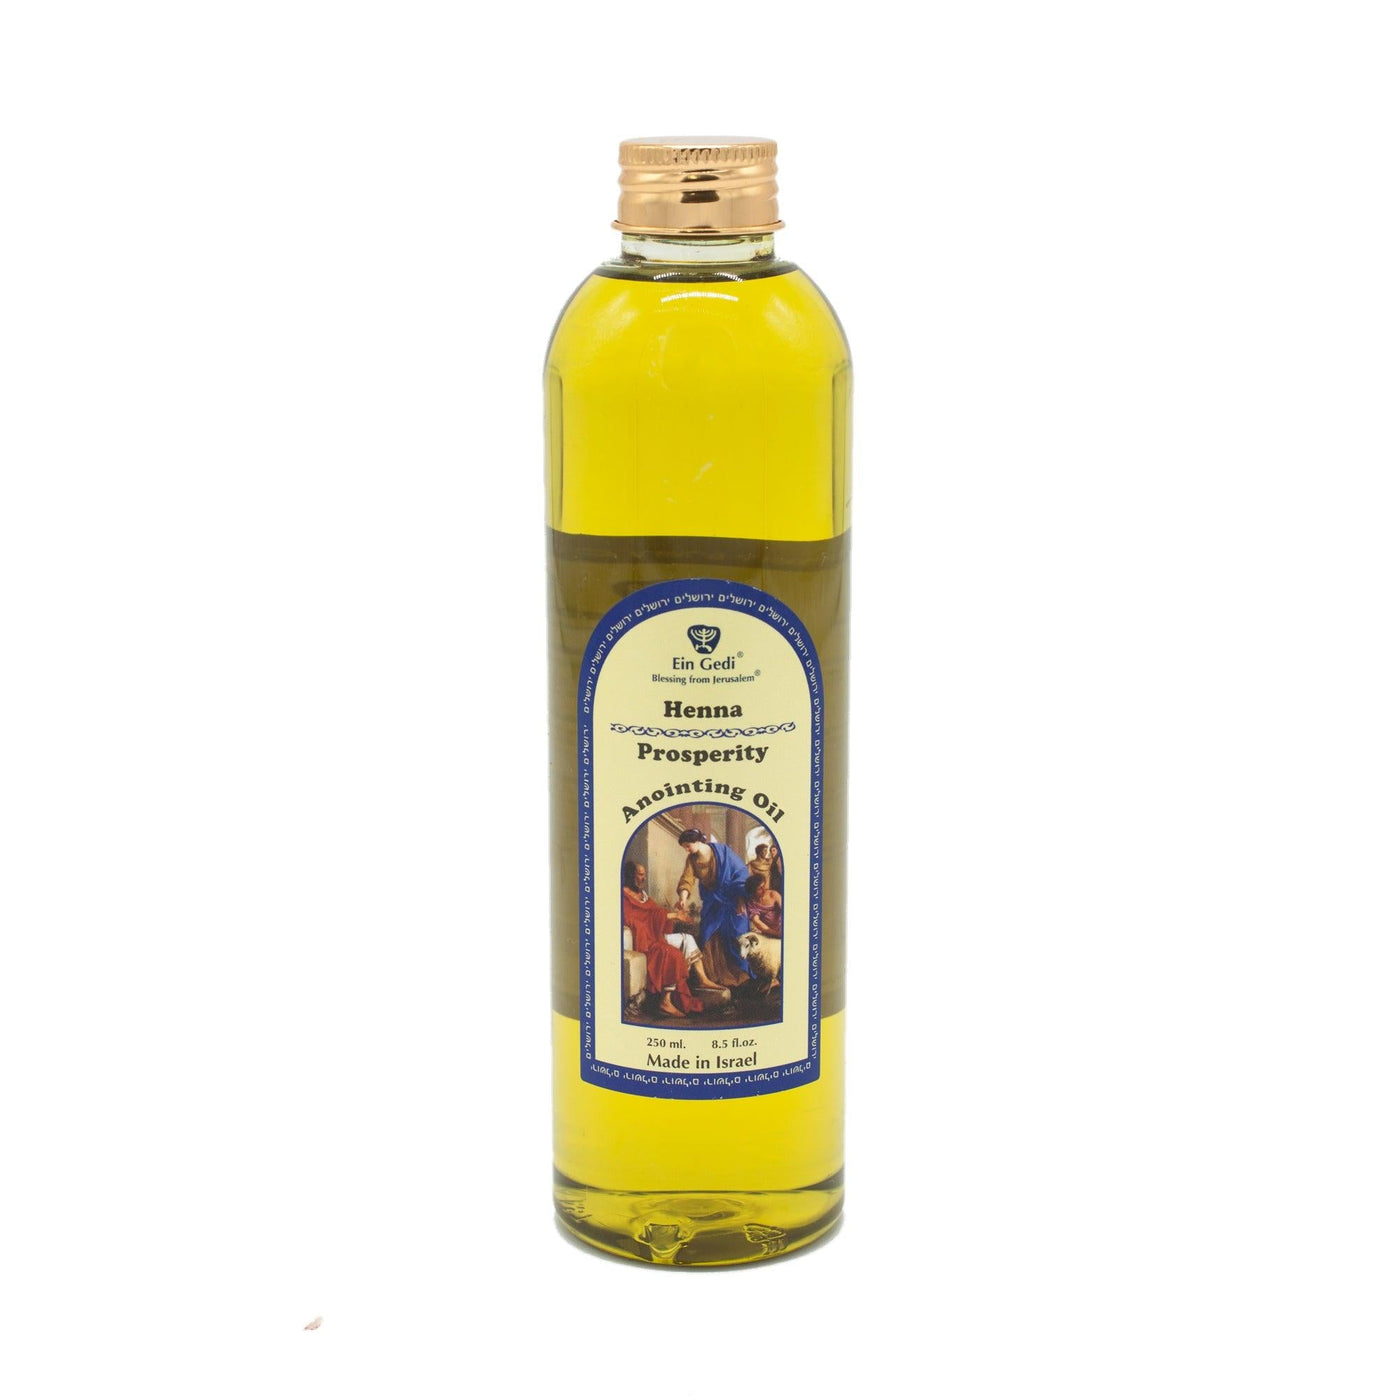 Lot of 6 x Different Anointing Oil 250 ml -8.5 fl.oz Ein Gedi From Holyland Jerusalem - Spring Nahal